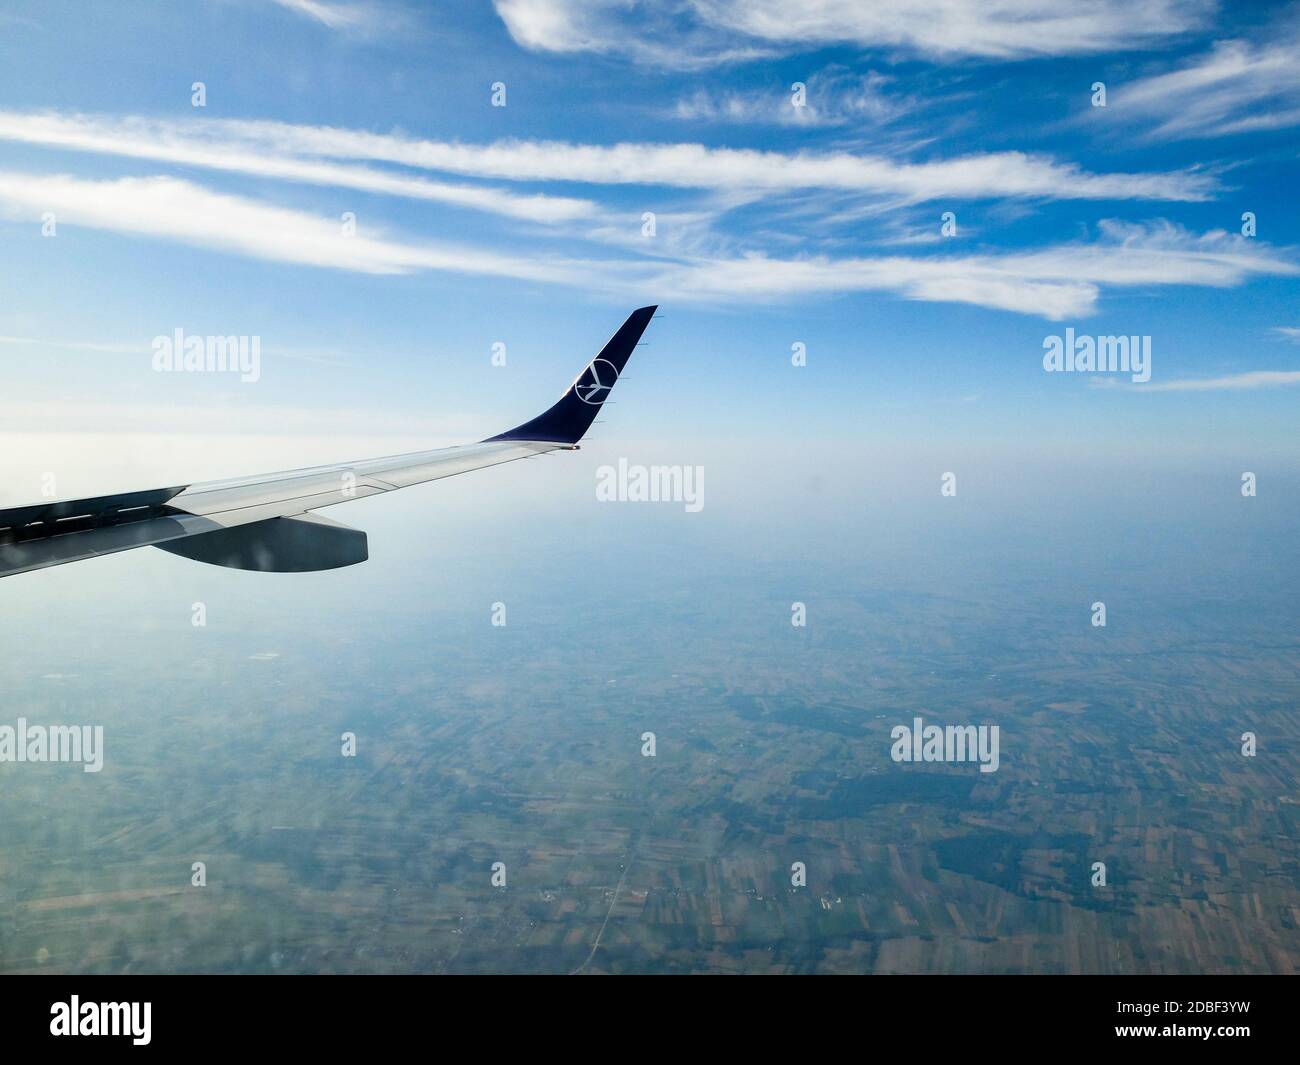 LOT Airlines B737-800 flight from London Heathrow to Warsaw,Poland as viewed from right hand passenger cabin window on a morning flight. Stock Photo